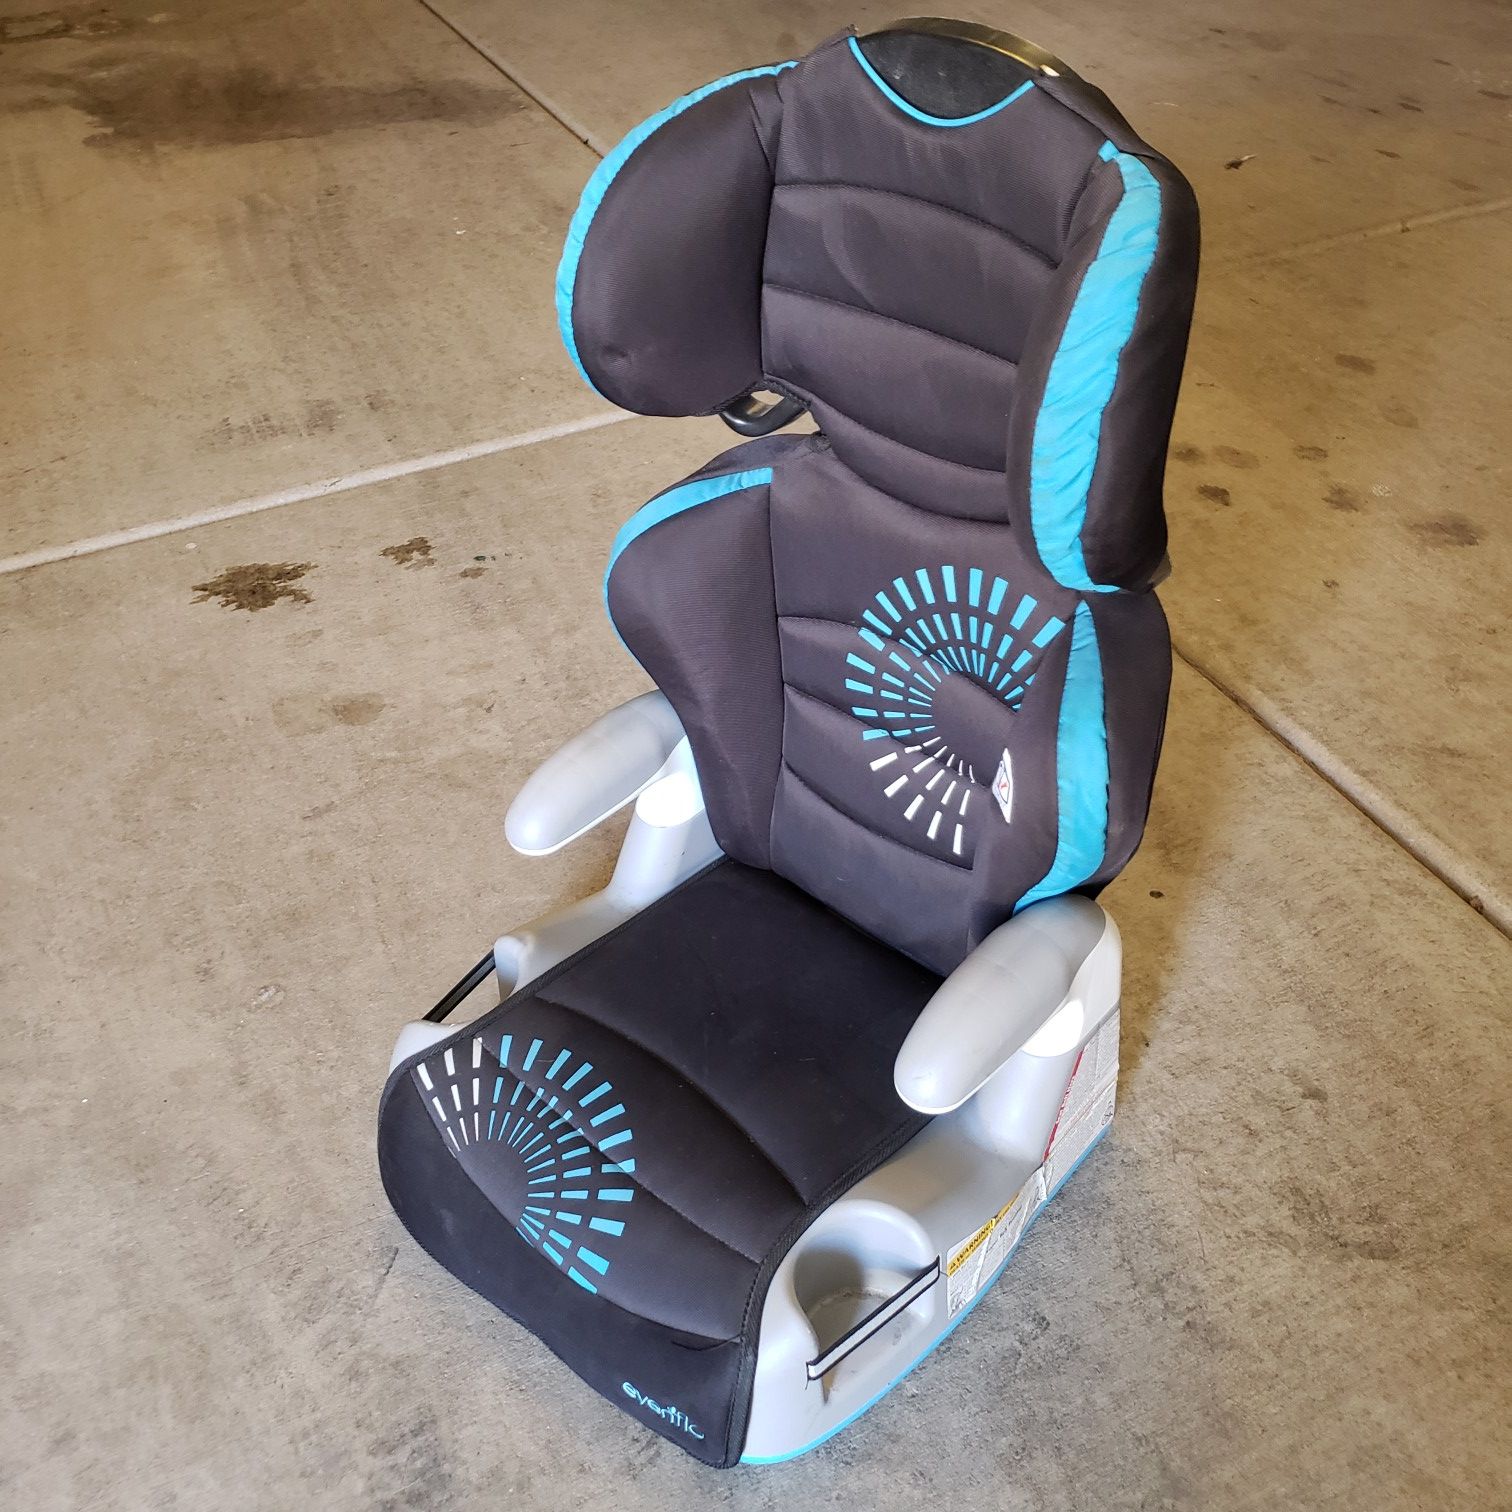 Evenflo booster seat. Gently used.